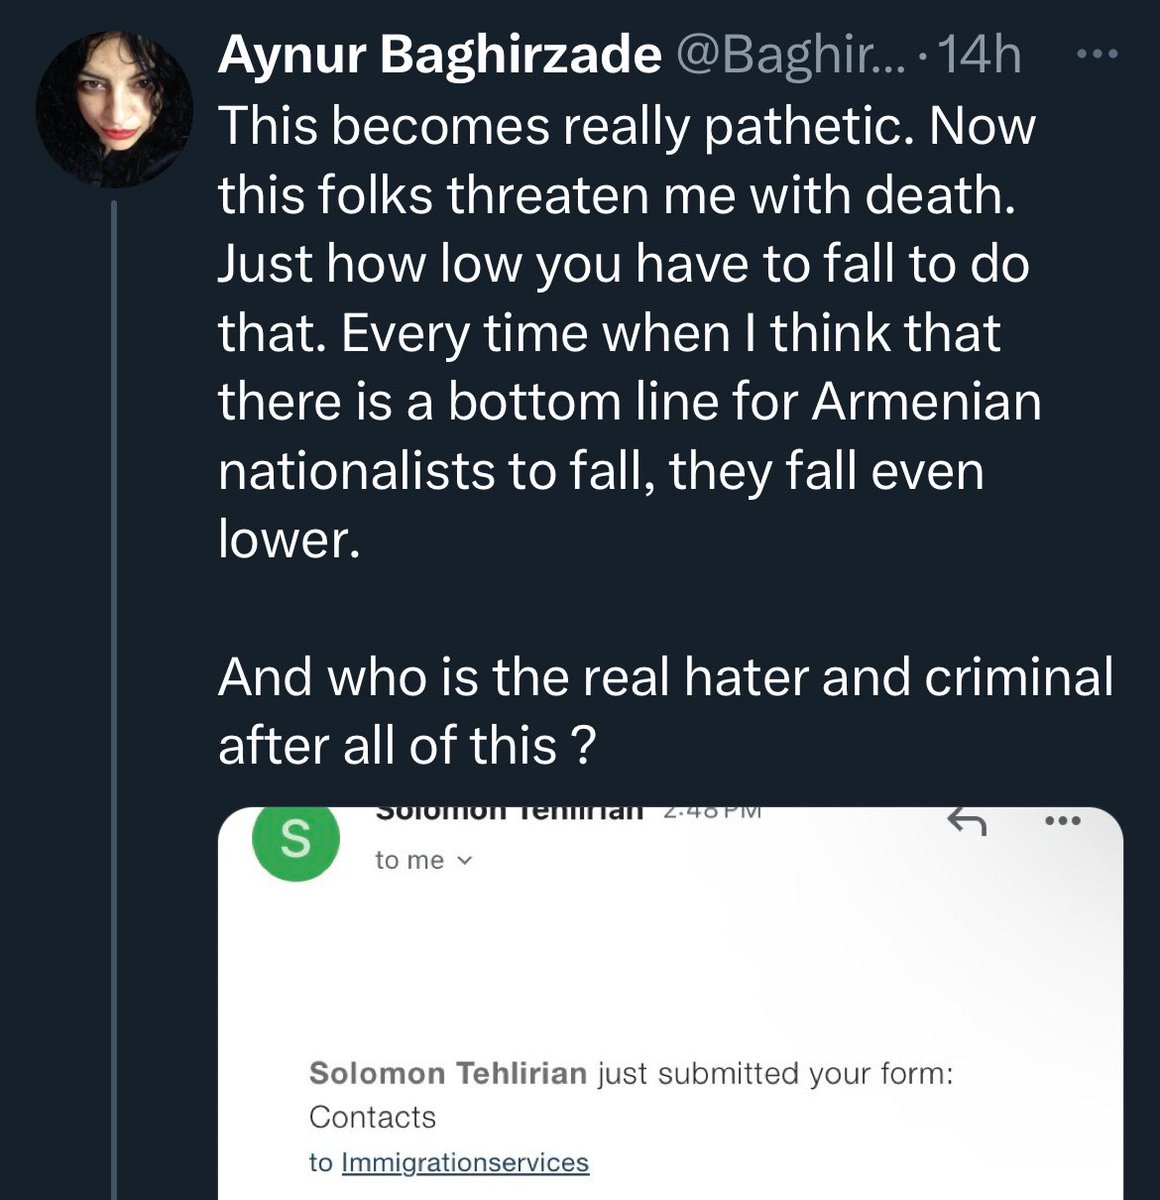 She posted this absolutely vile tweet advocating for the genocide/erasure of a whole people and then spent the rest of the day whining about the backlash, pretending she’s the victim. Maybe seek professional help, or better shut your horrendous mouth.